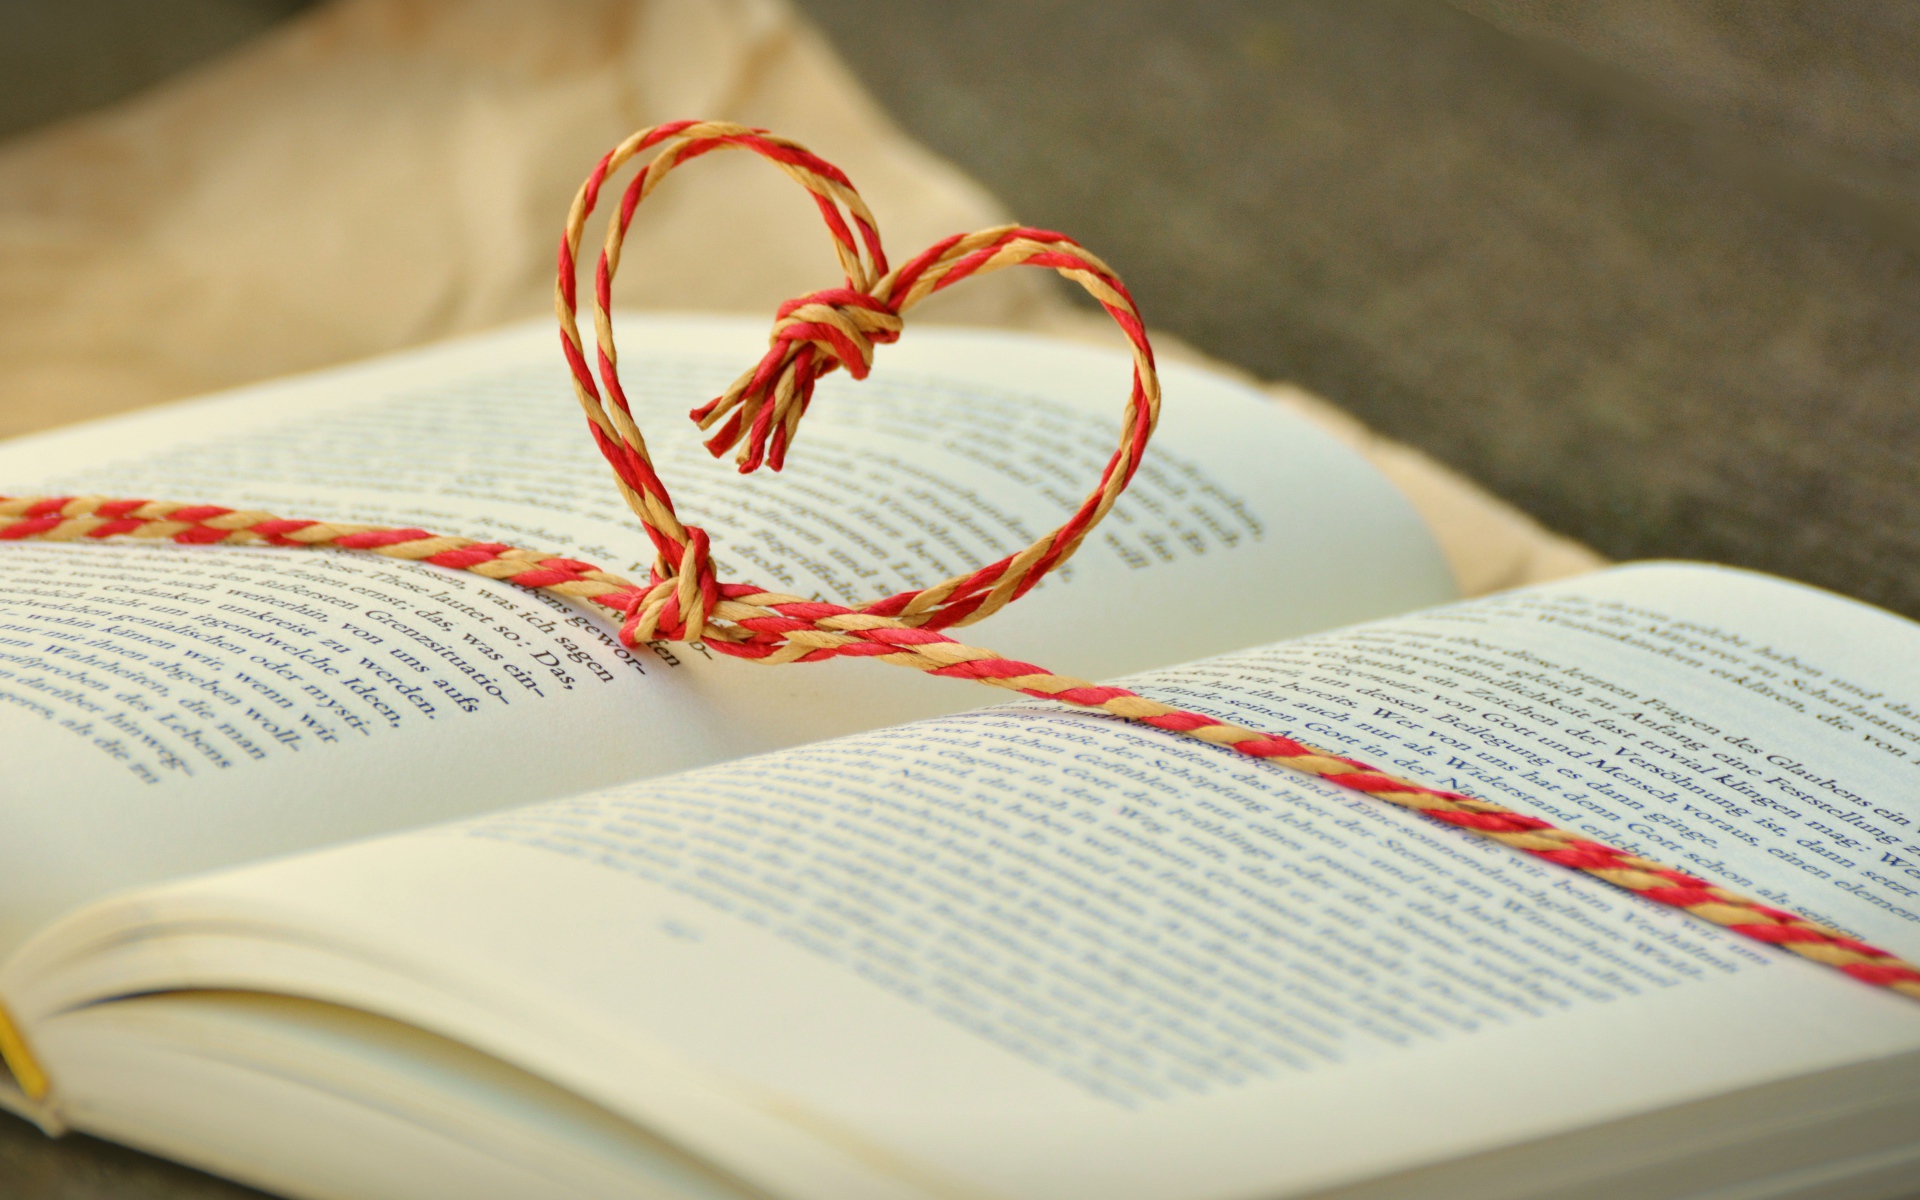 The heart of the rope lies on an open book